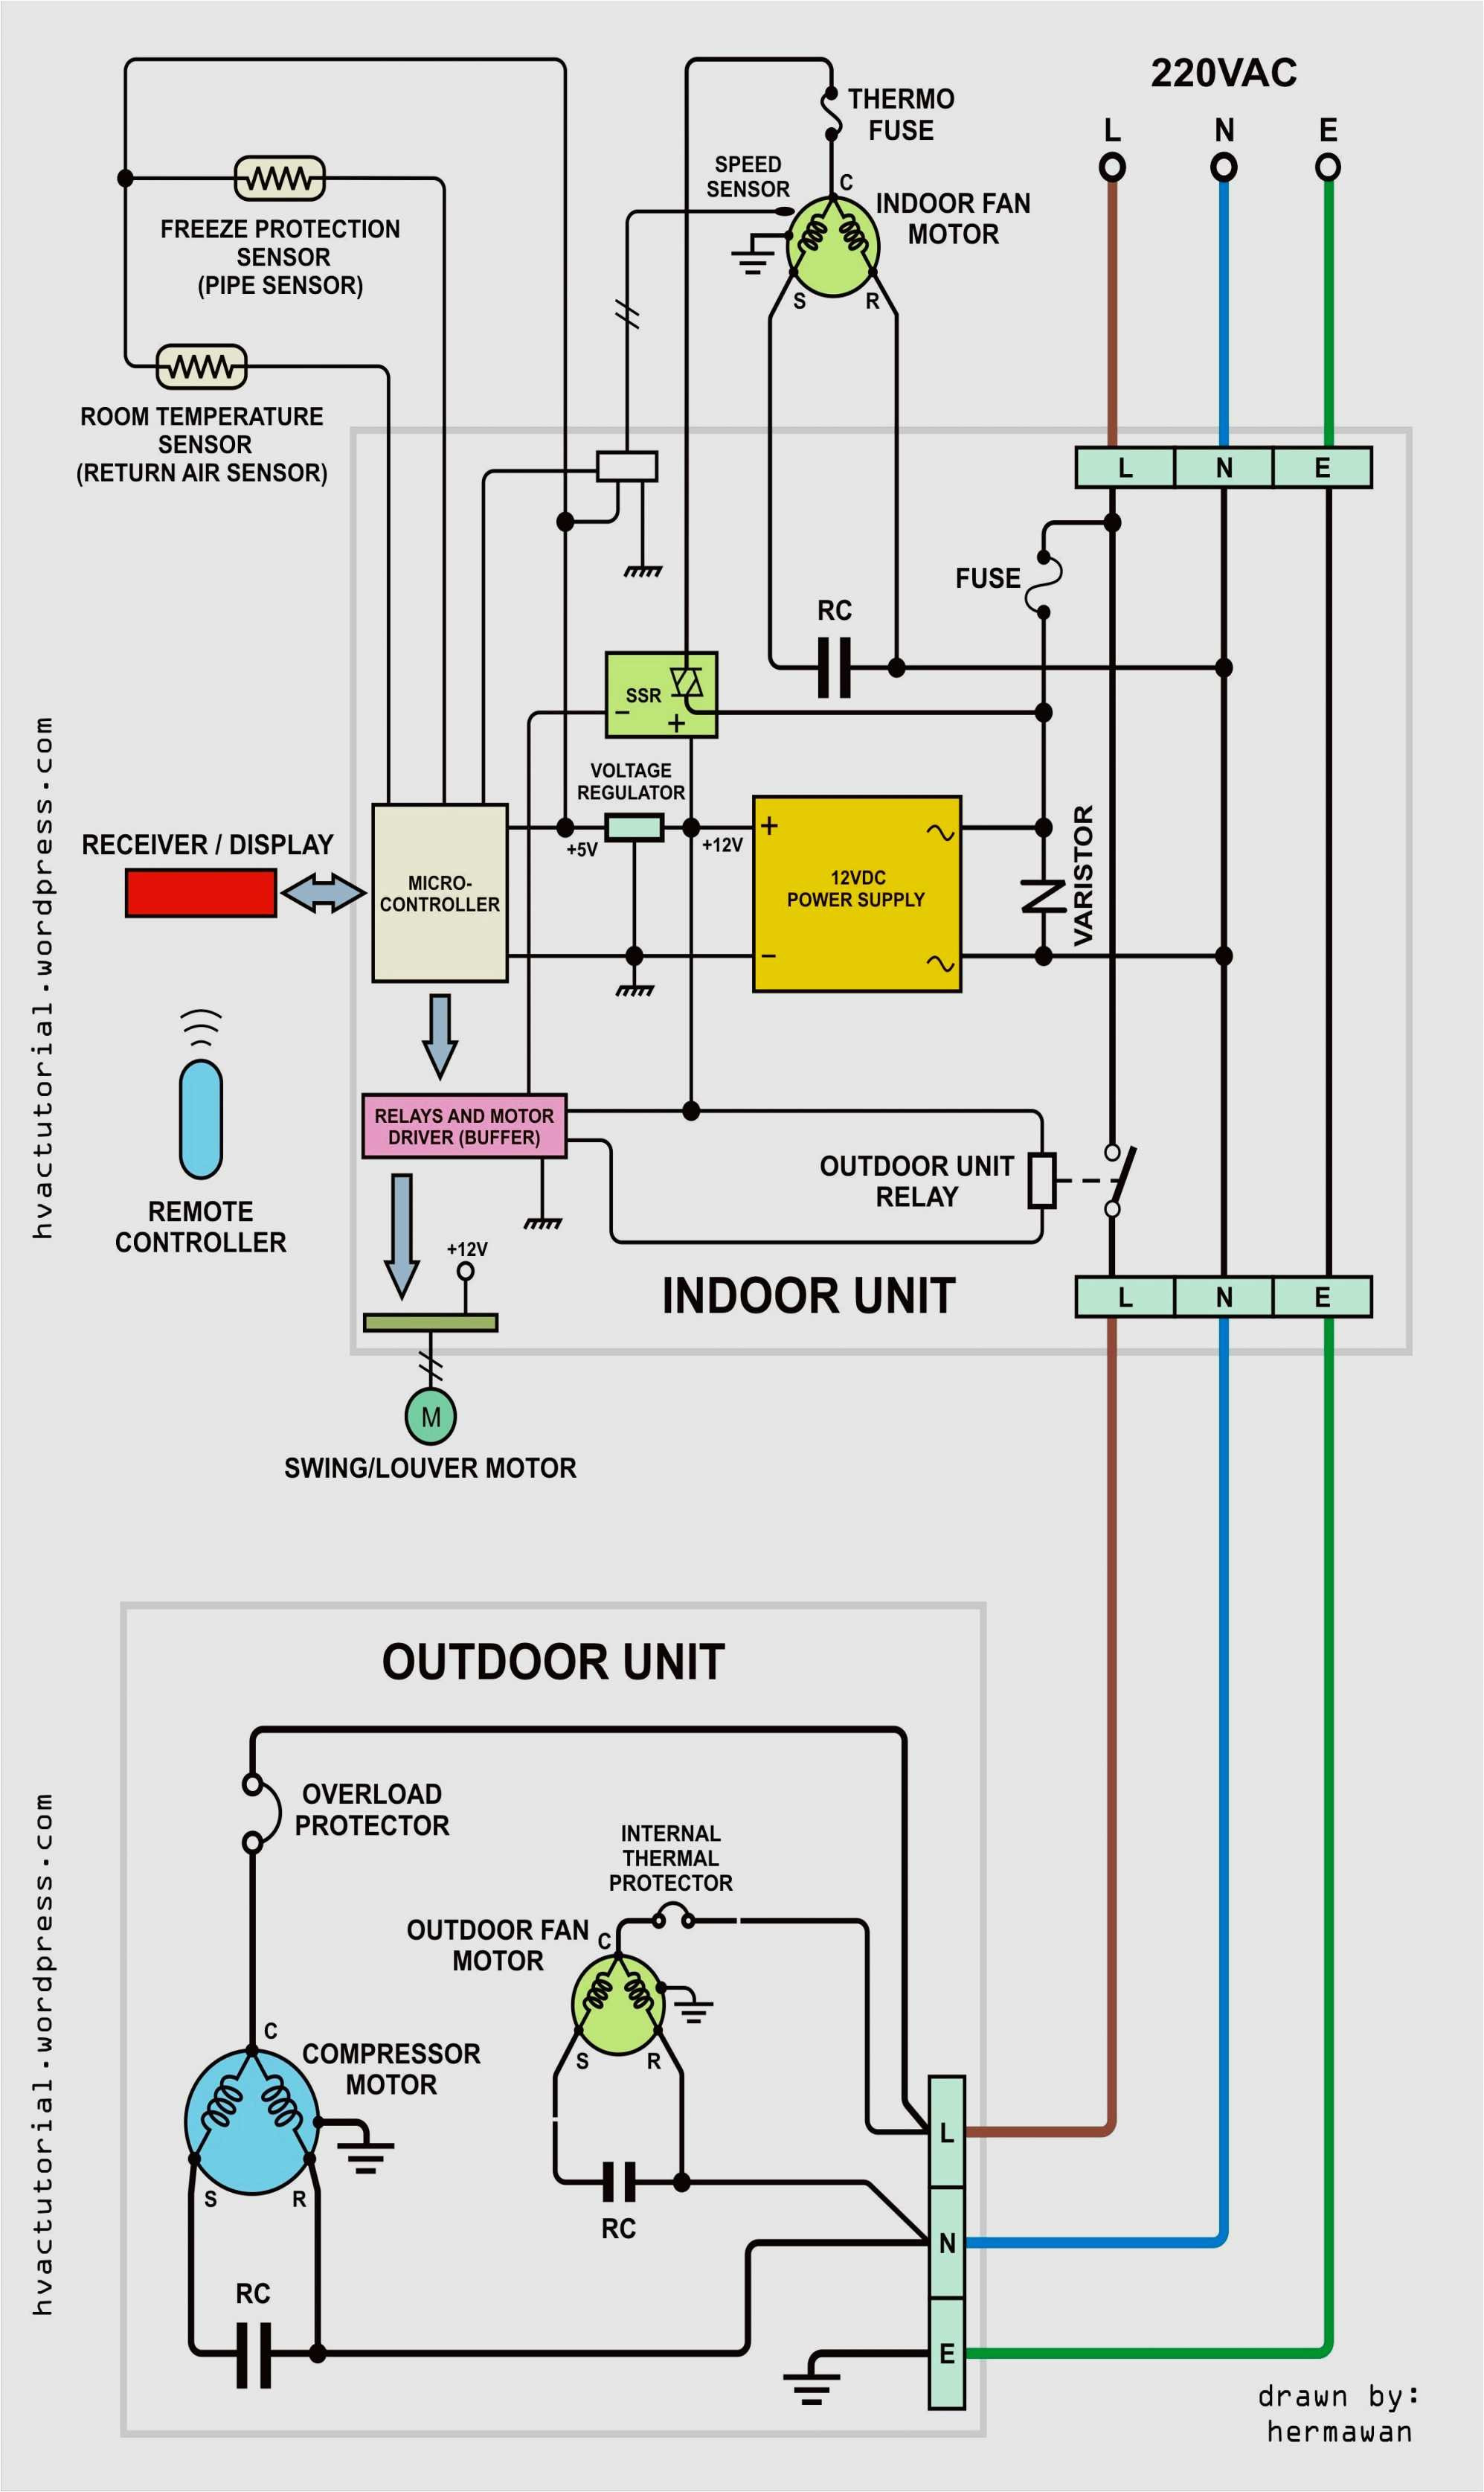 Carrier Infinity Thermostat Wiring Diagram from www.adinaporter.com